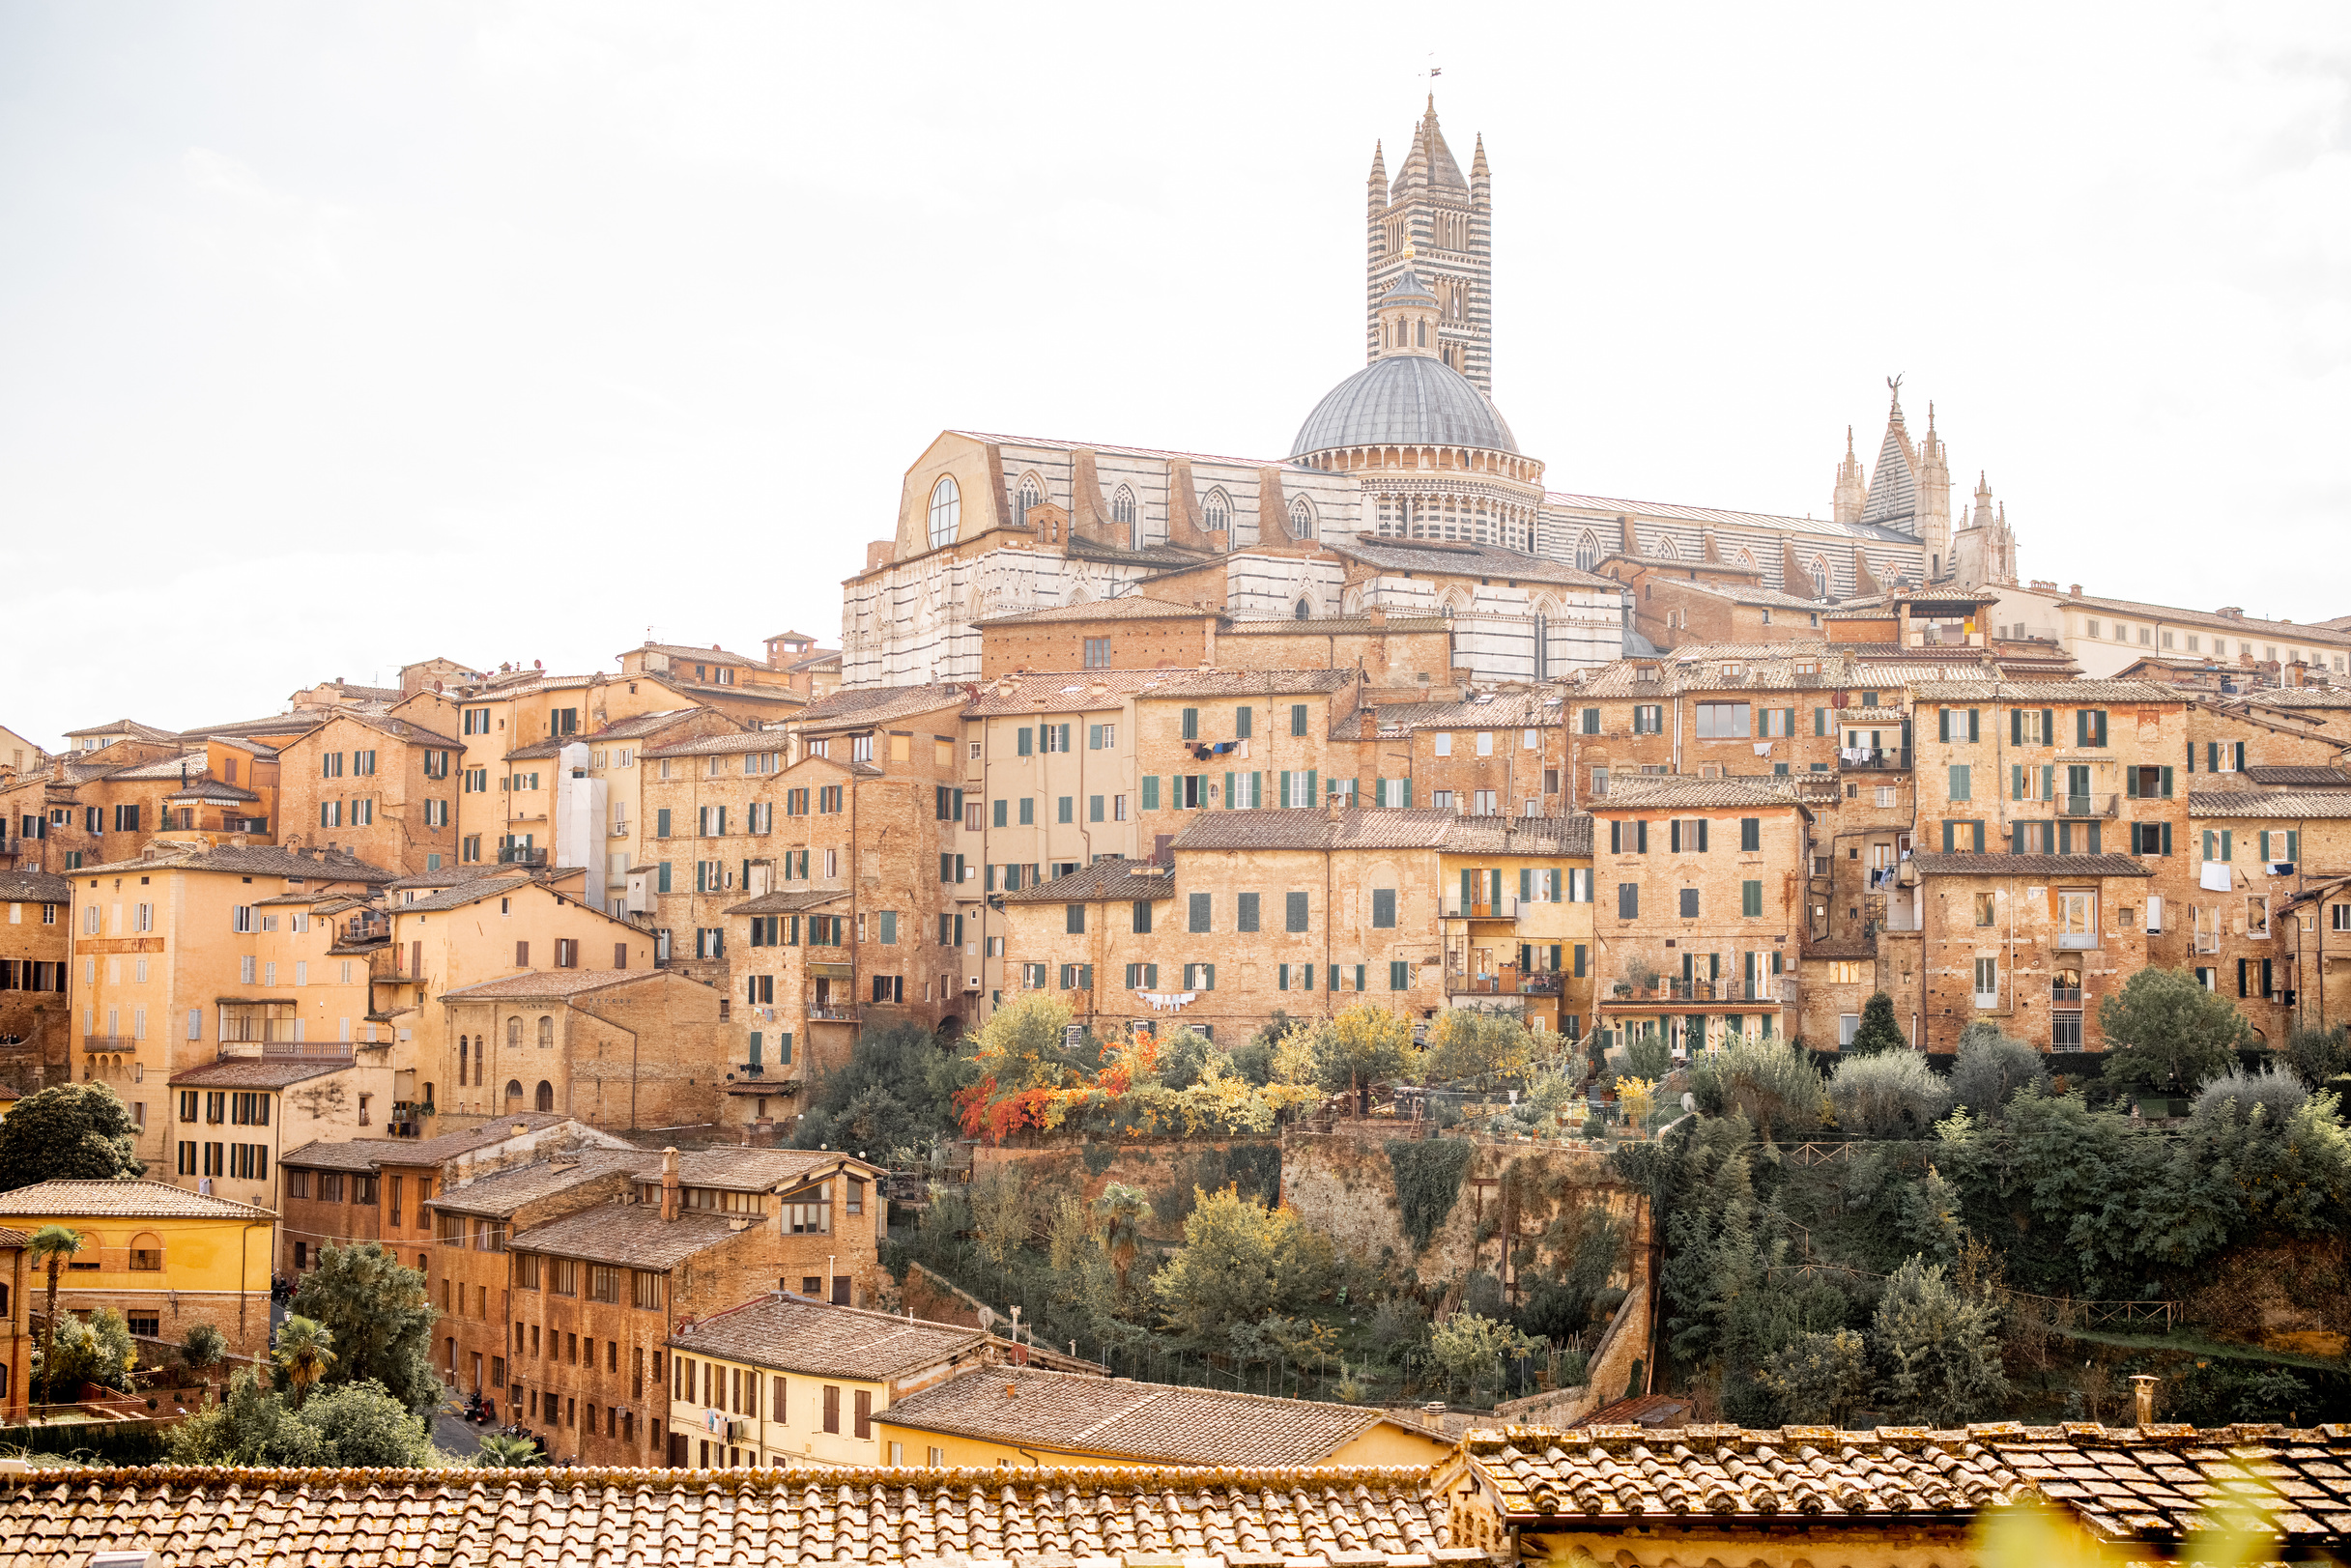 Cityscape of Siena Town in Tuscany Region of Italy